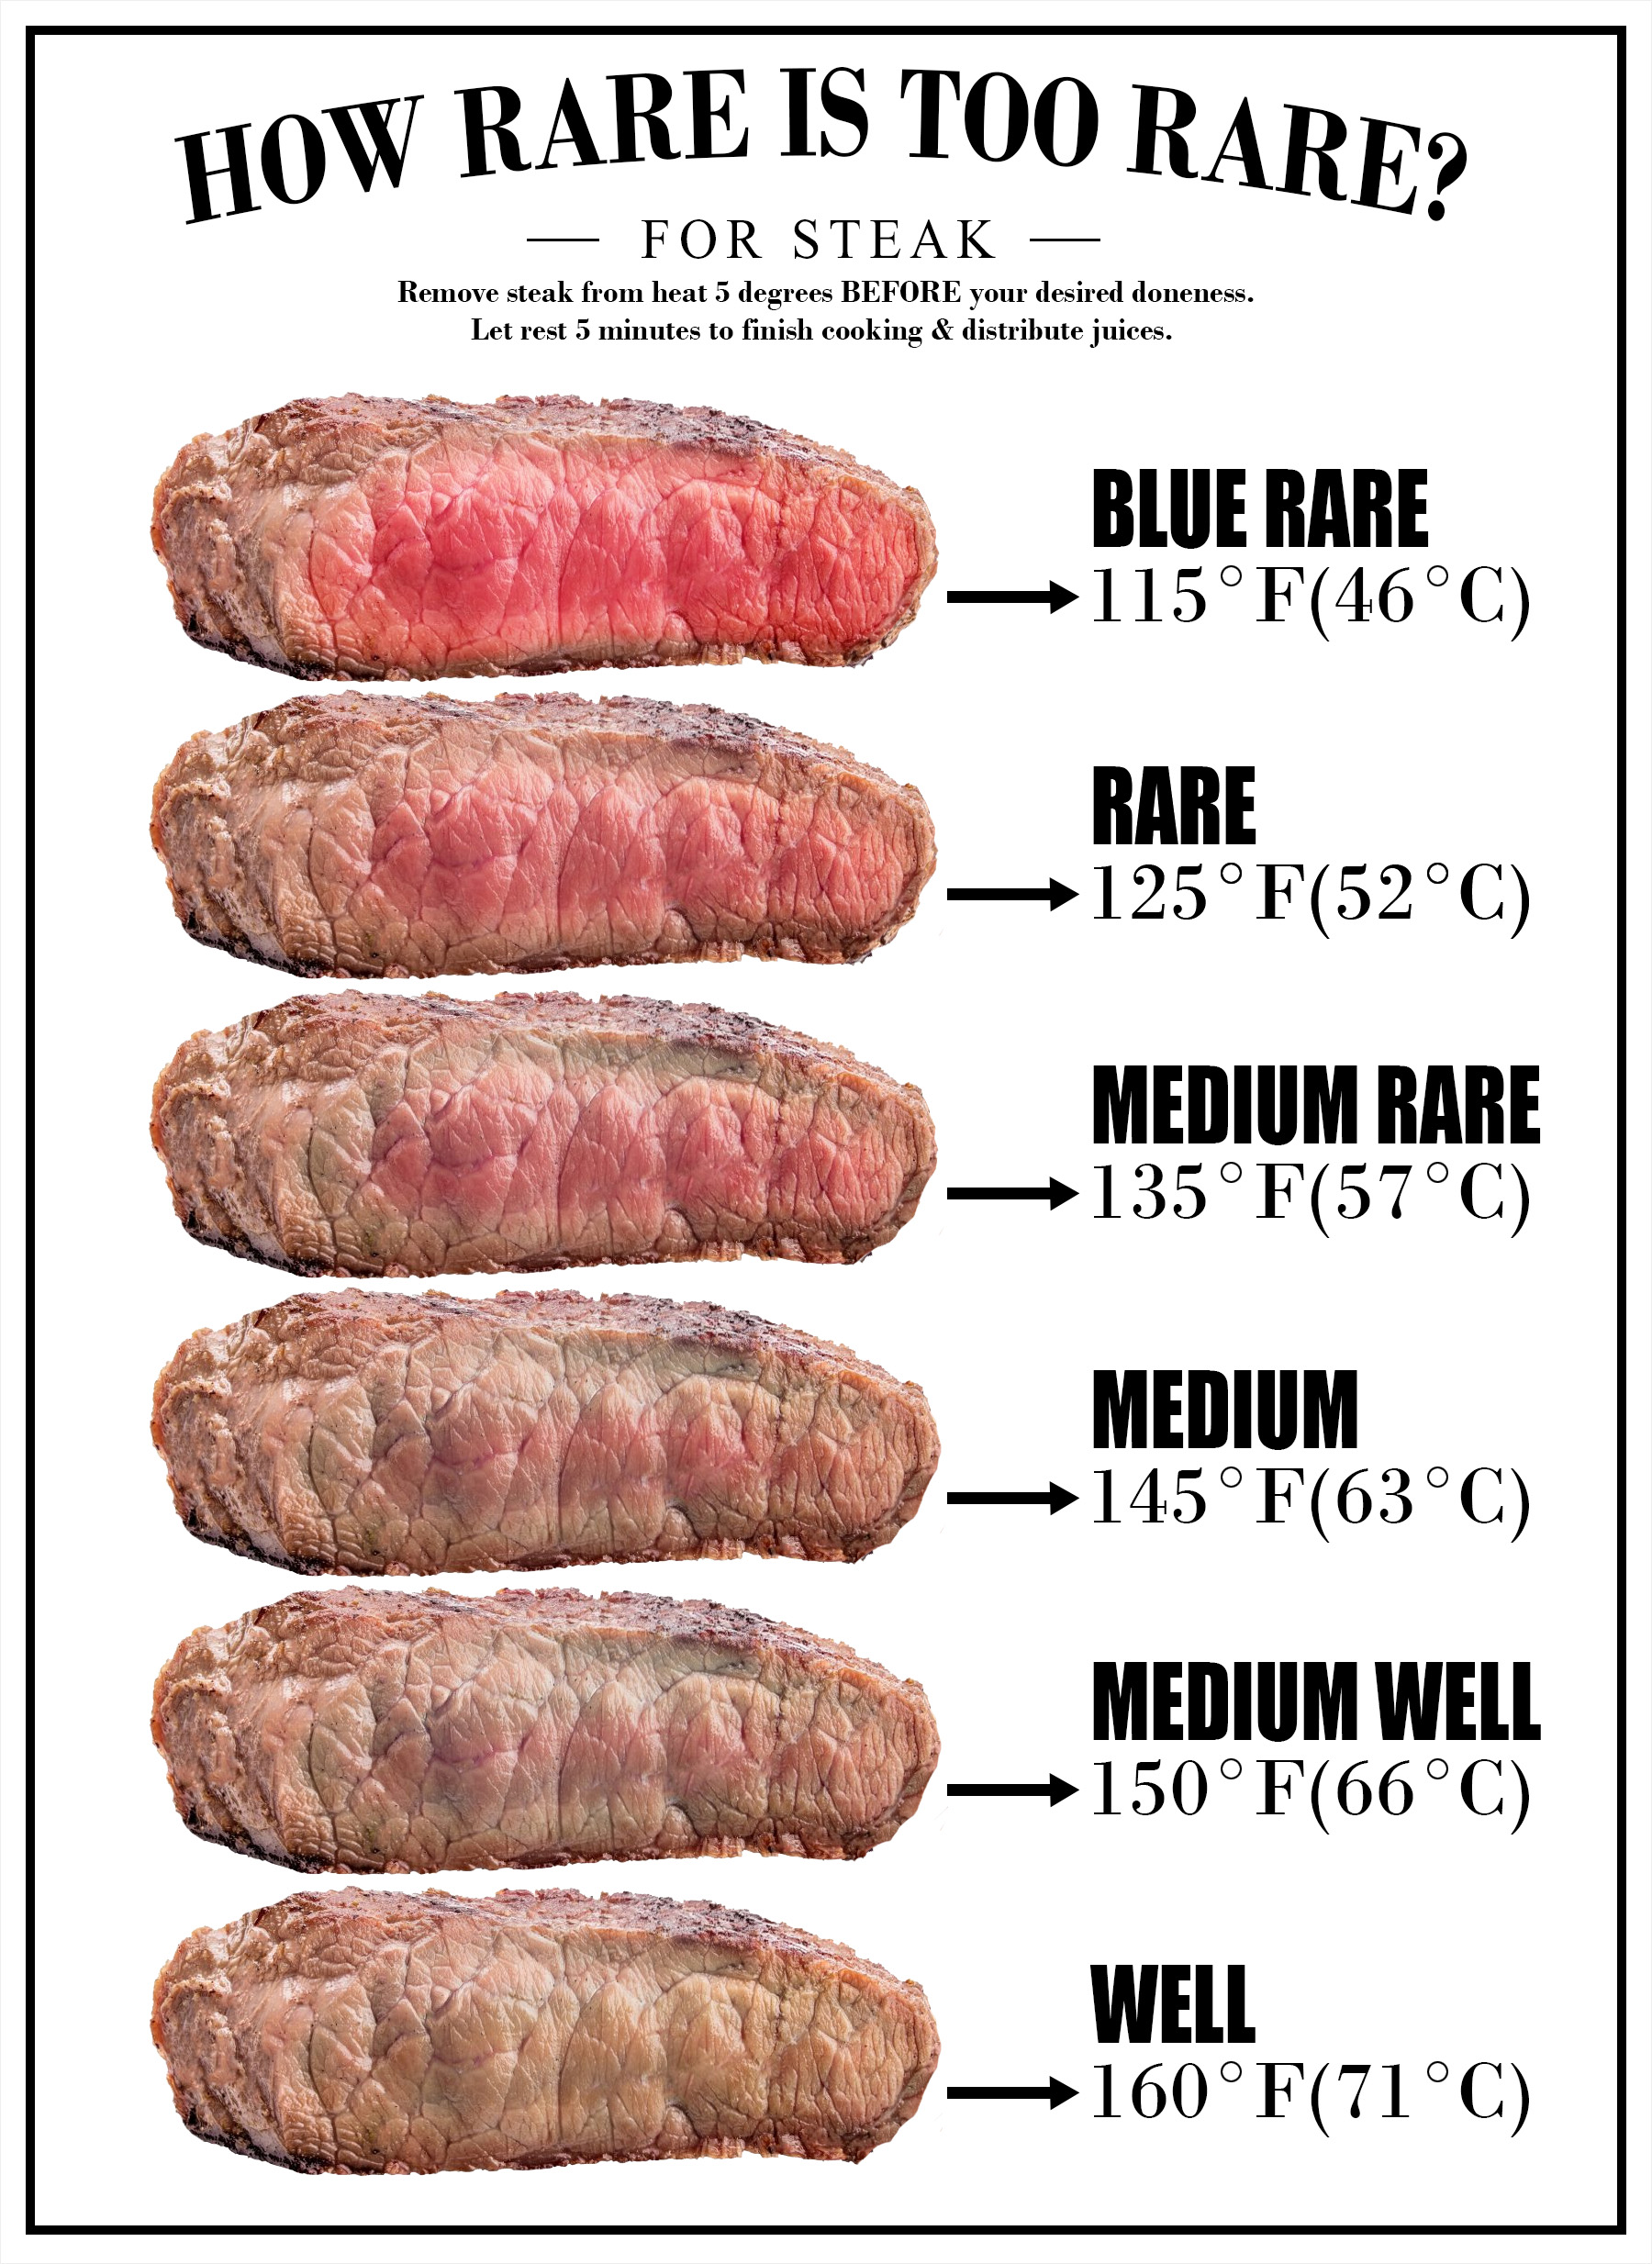 how rare is too rare for steak infographic 1